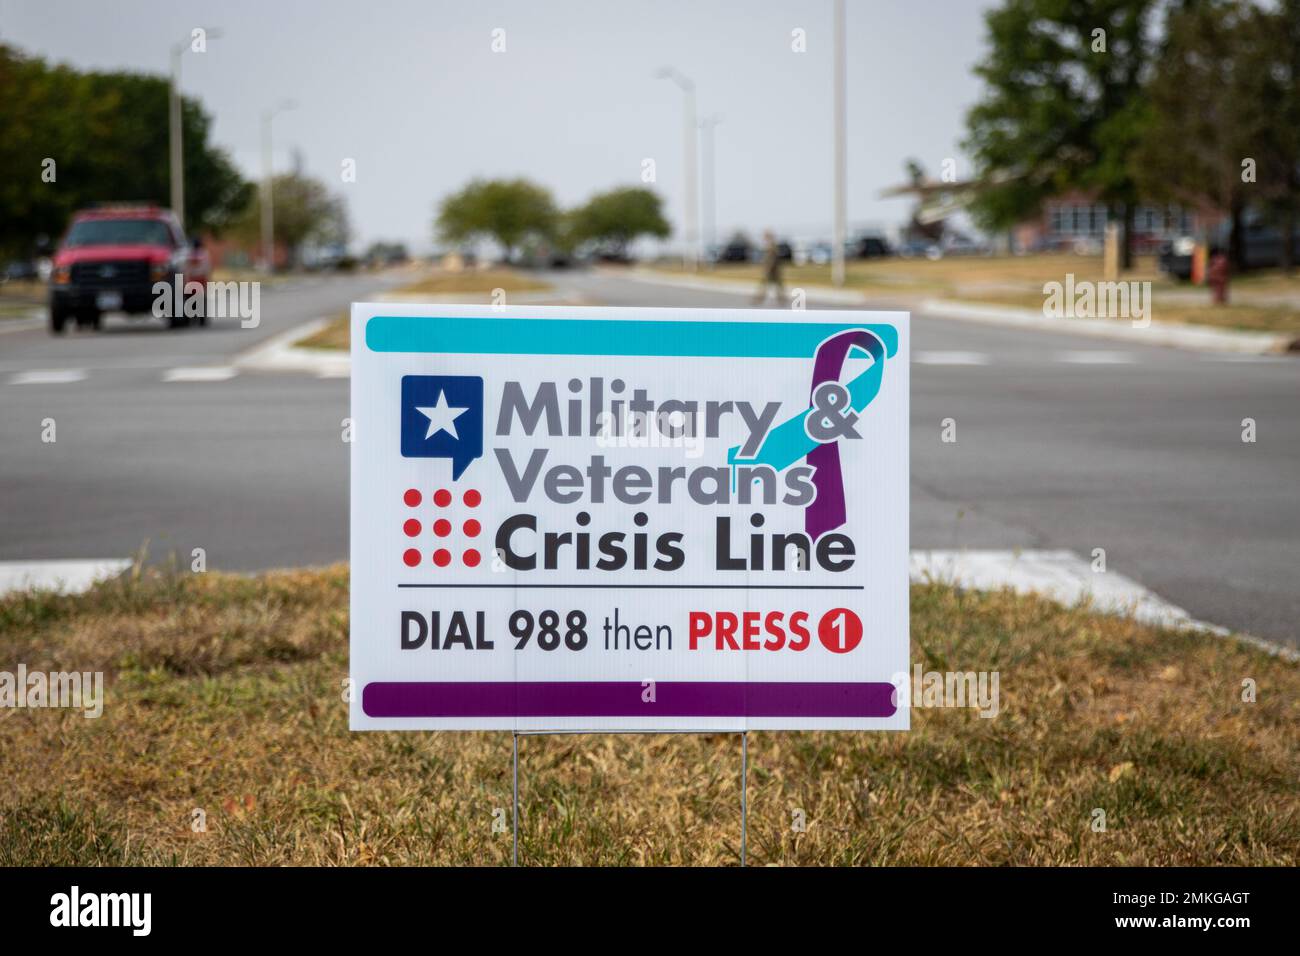 A sign for the Military and Veterans Crisis Line reading “Dial 988 then Press 1” is seen at the entrance to the Nebraska National Guard air base in Lincoln, Nebraska, on Sept. 9, 2022. September is National Suicide Prevention Awareness Month and Sept. 10, 2022 is World Suicide Prevention Day. If you or someone you know is experiencing thoughts of suicide, know that you are not alone and that someone is always available to listen. Free and confidential support is available 24/7, 365 days a year with the National Veterans Crisis Line. Dial 988 then press 1 to get connected to a caring, qualified Stock Photo